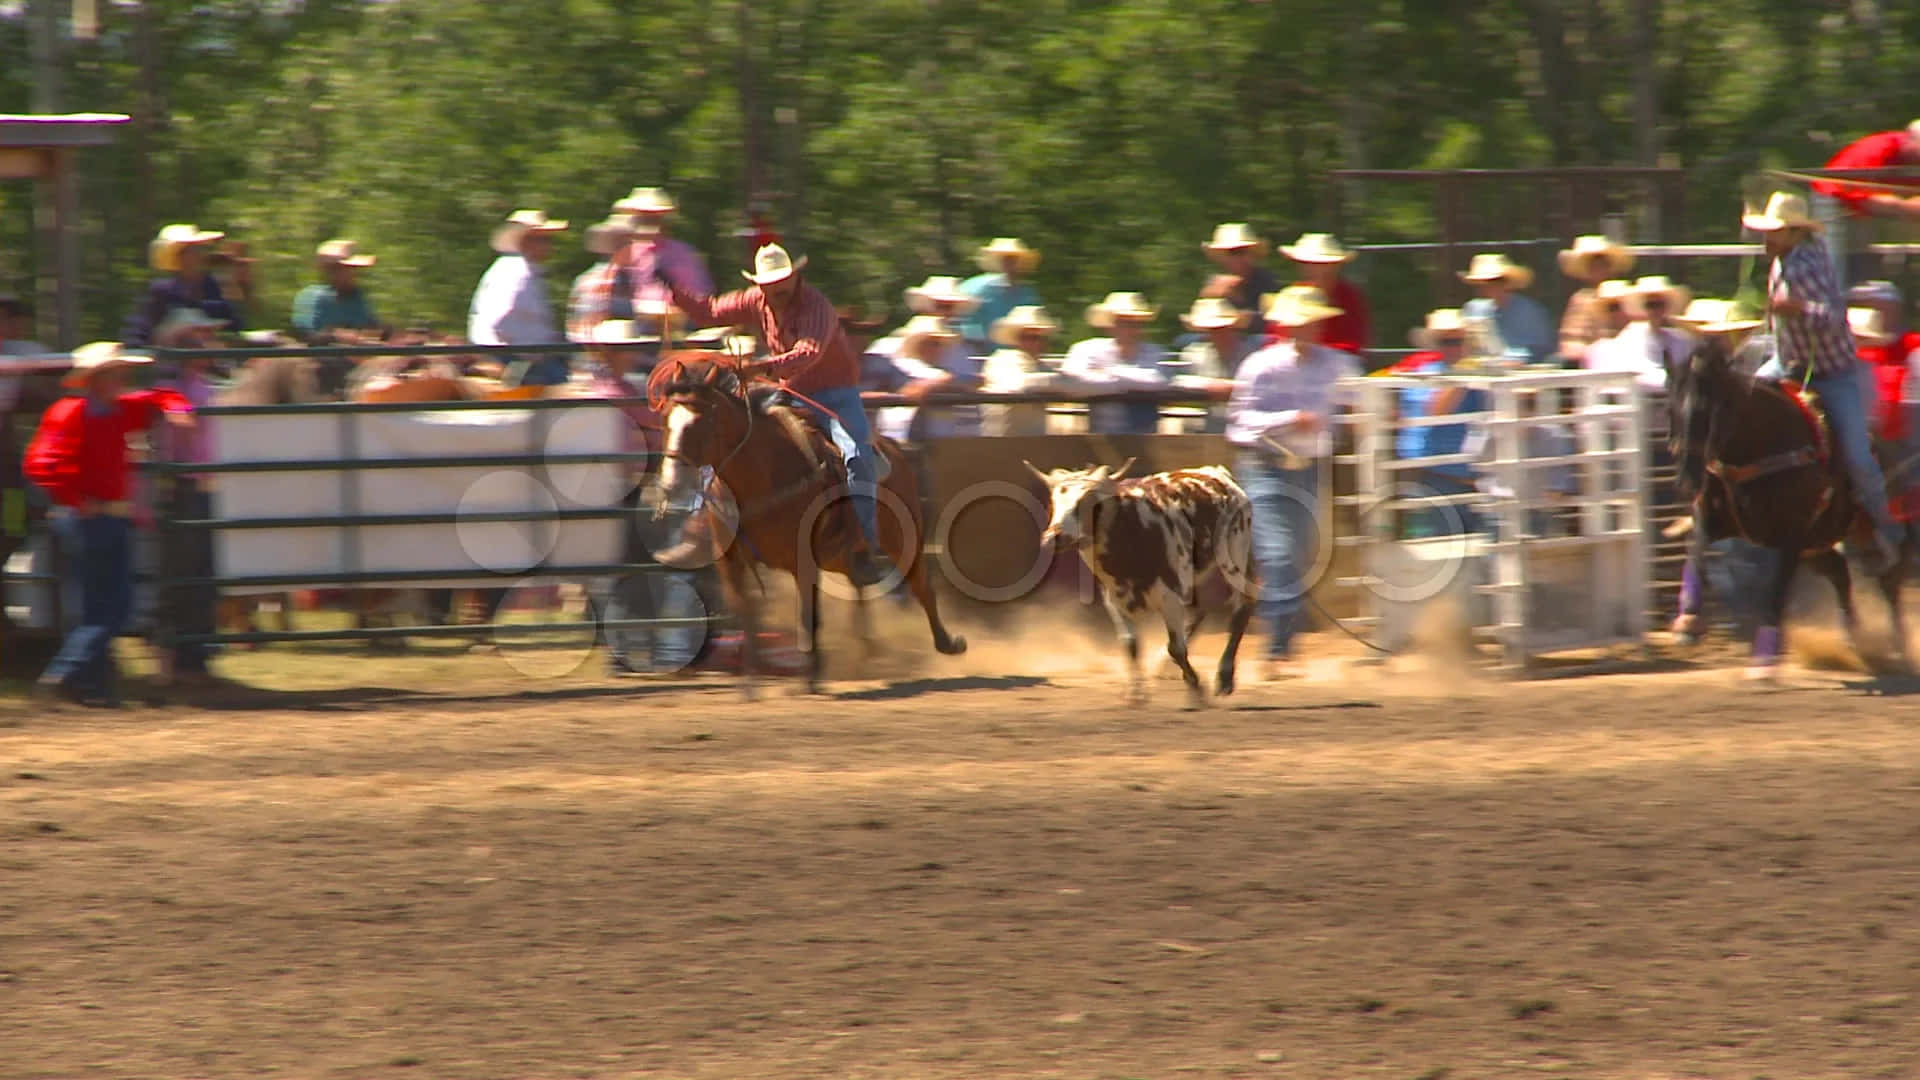 Two cowboys rope in a calf in a friendly team roping match. Wallpaper